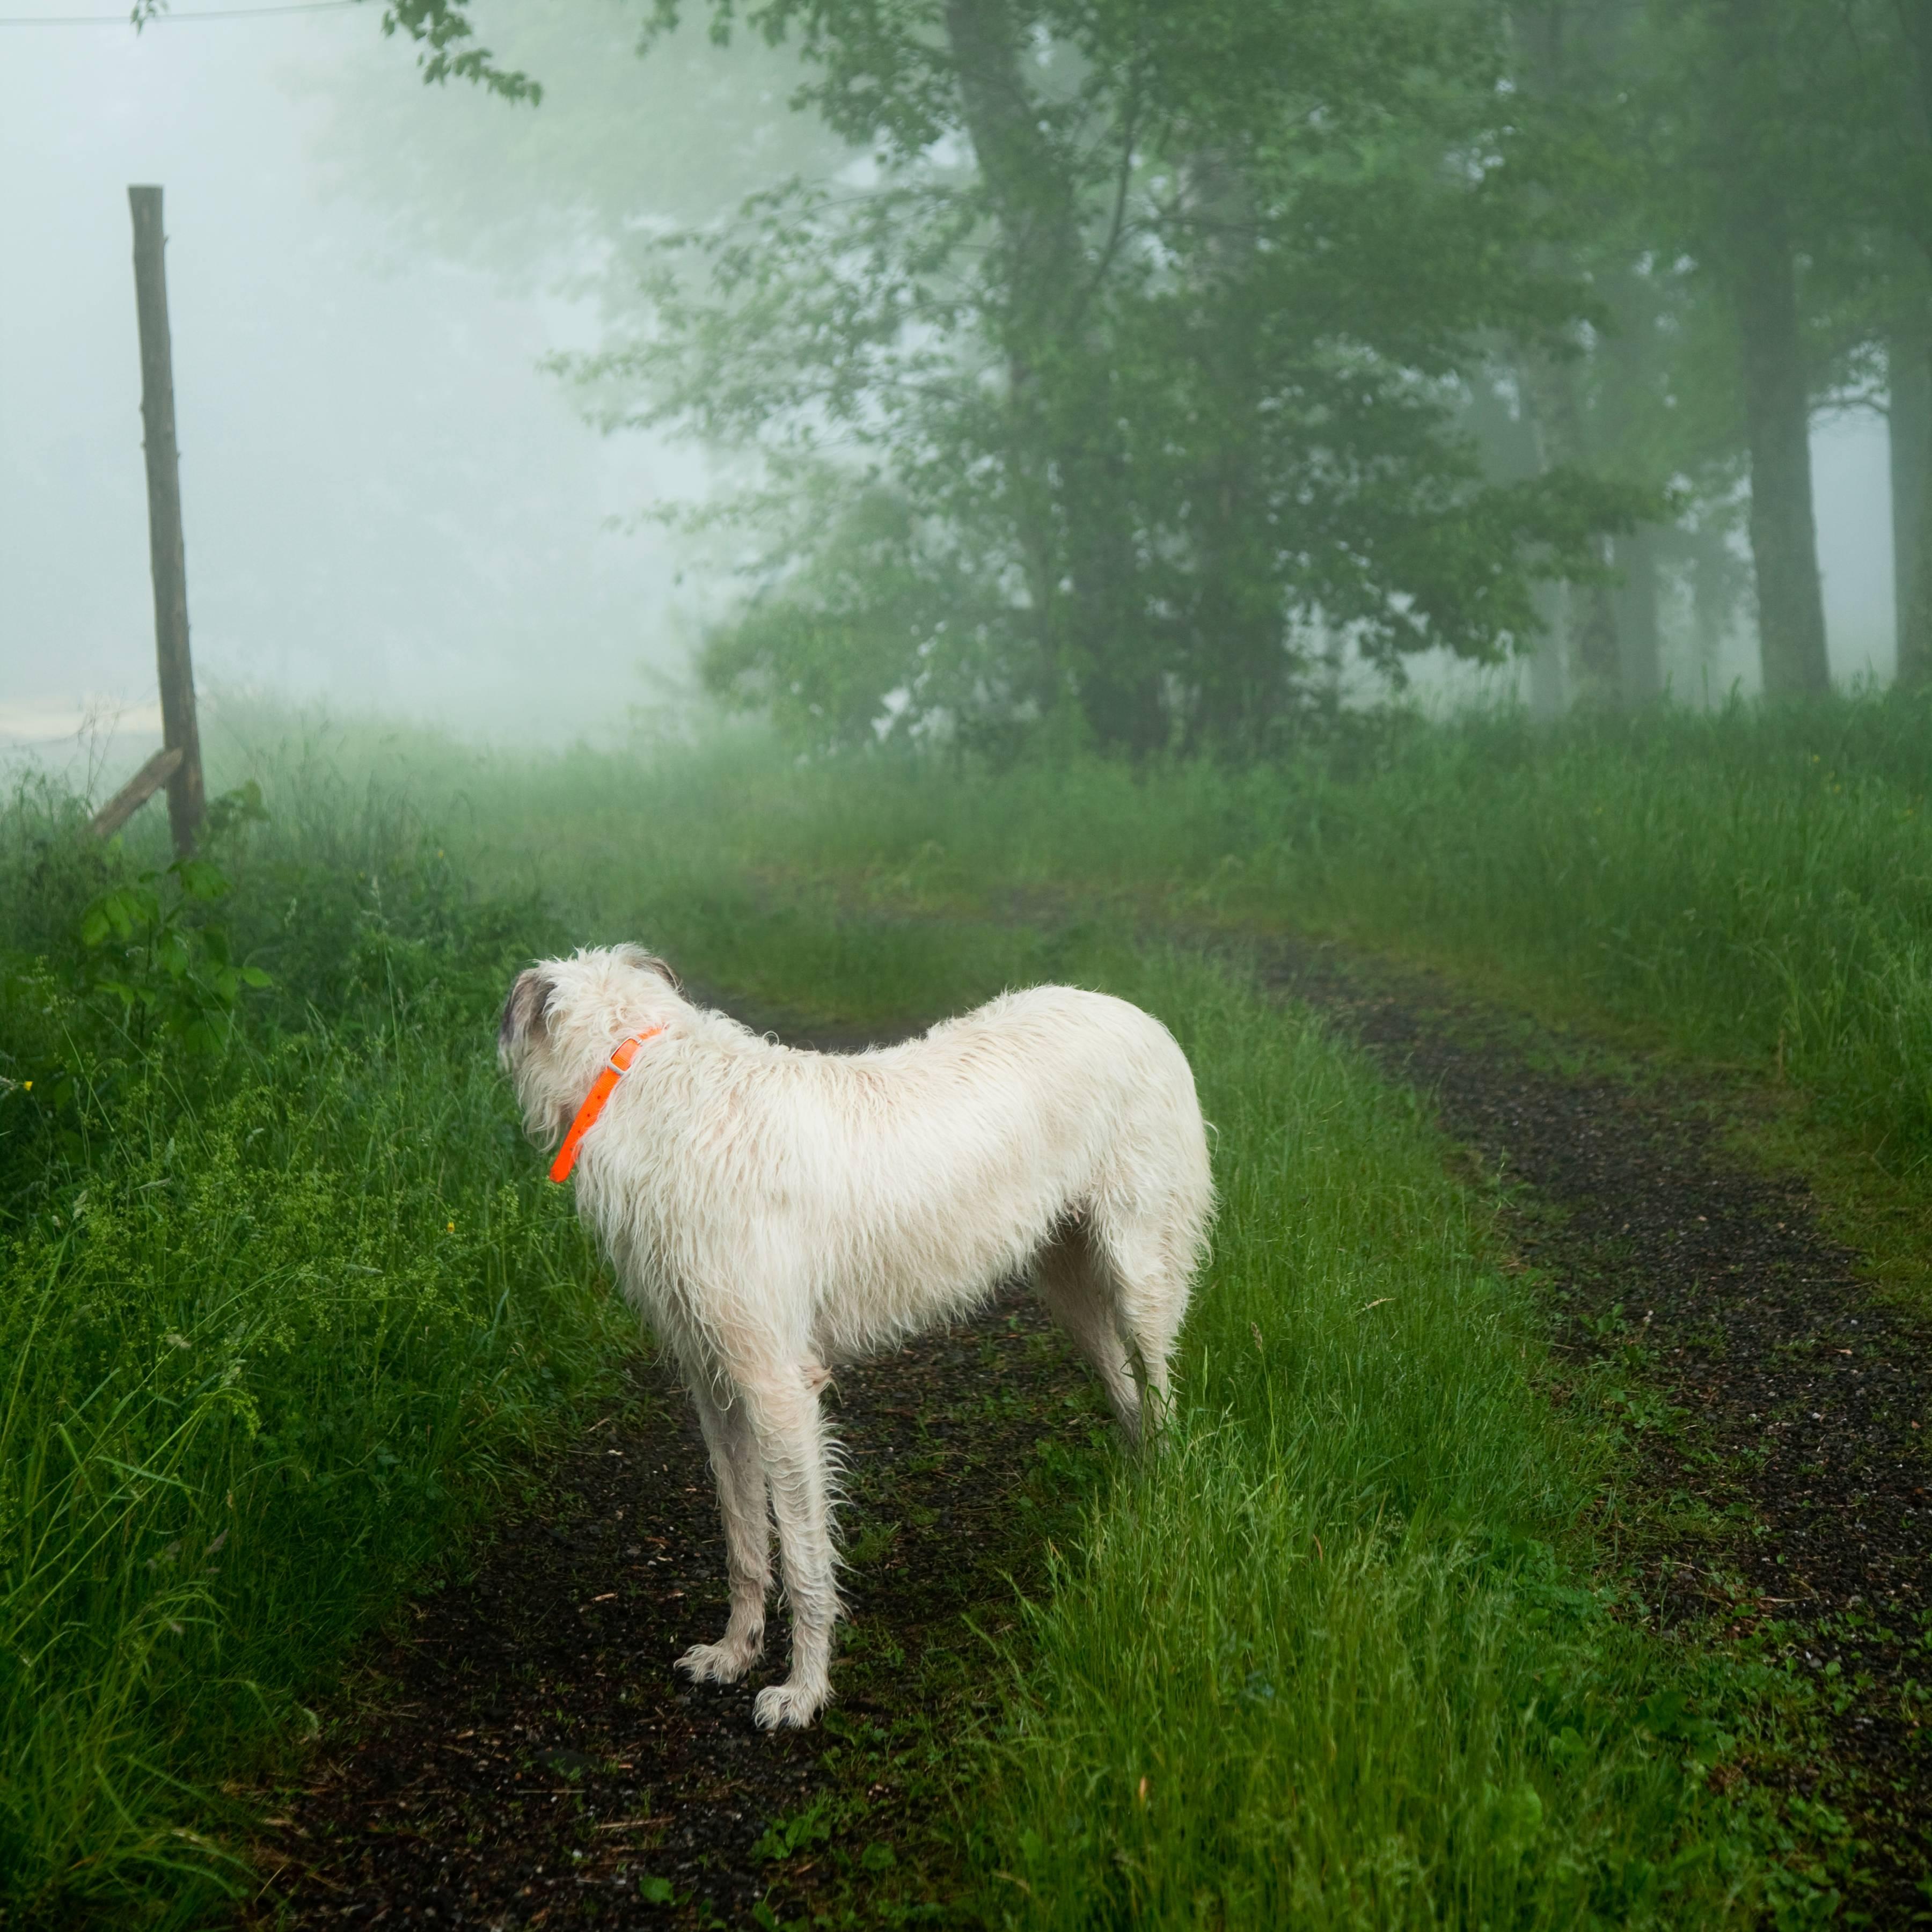 Wolfhound, Hope, Maine, 2012 - Cig Harvey (Colour Photography)
Signed and numbered on reverse
Digital c-type print

Available in three sizes:
14 x 14 inches, edition of 10
28 x 28 inches, edition of 7
40 x 40 inches, edition of 5

International